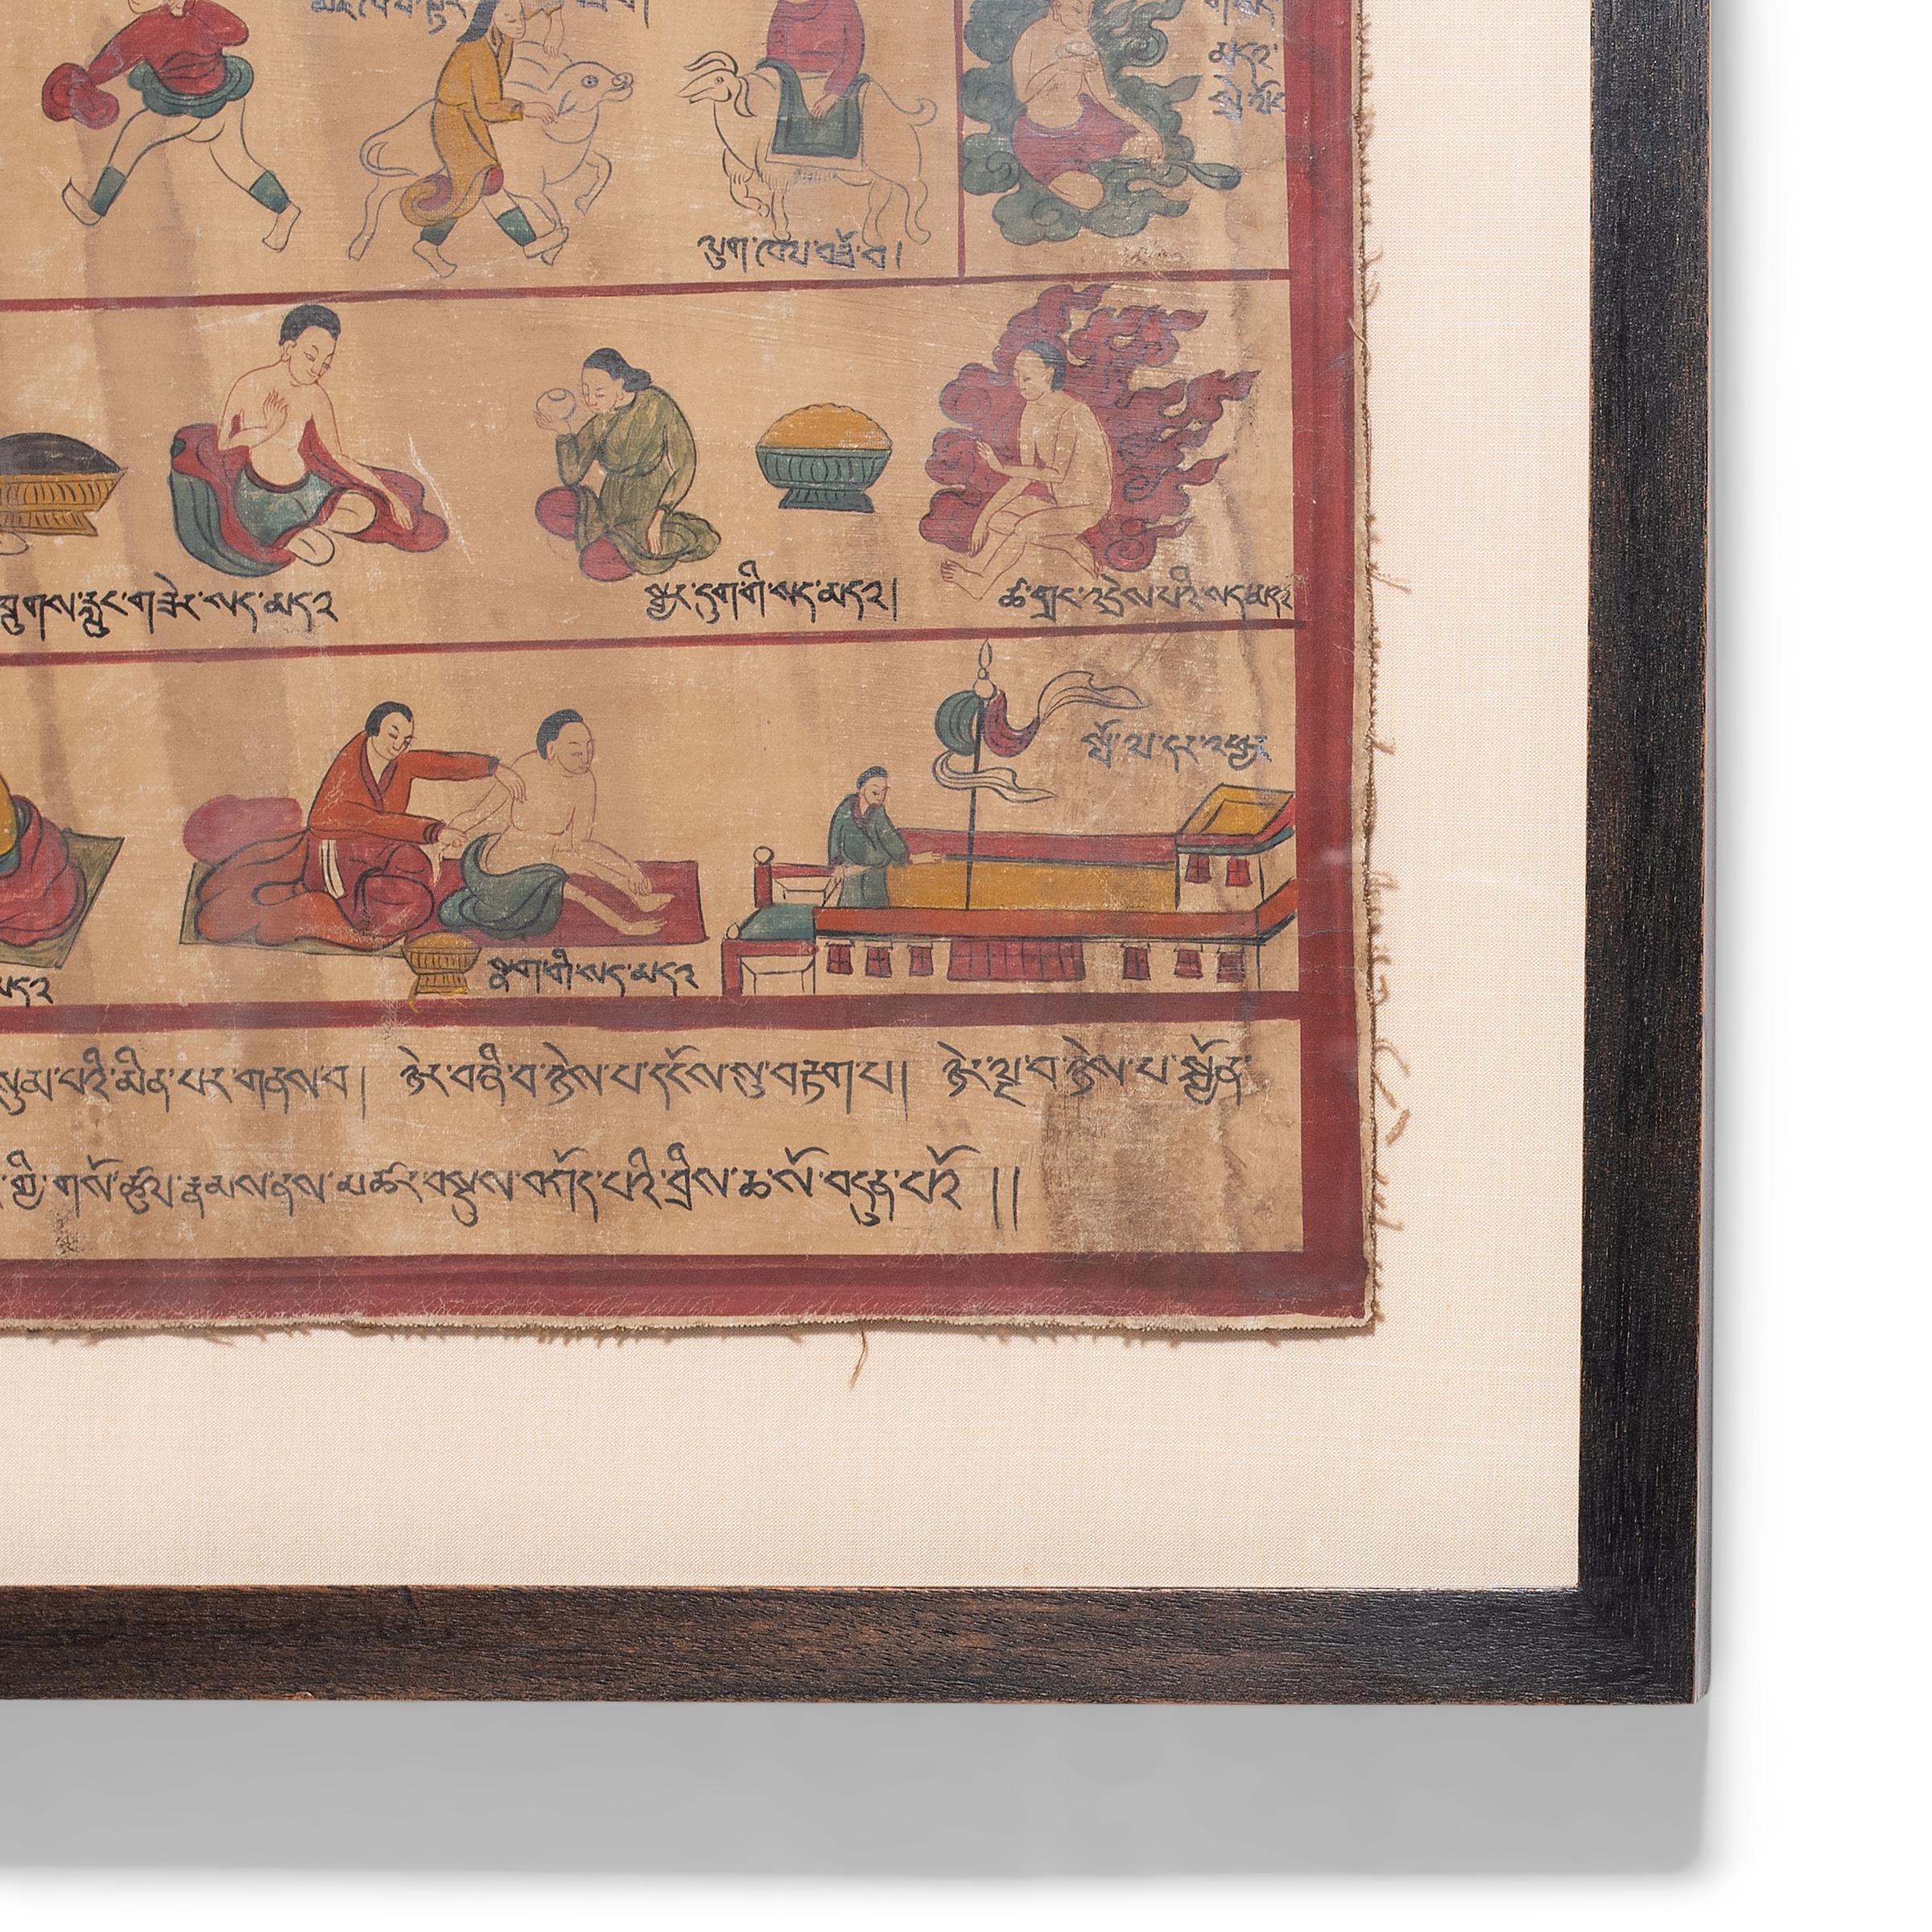 This beautifully detailed Tibetan folk painting dates to the mid-20th century and shares traditional knowledge in the style of painted Buddhist thangkas or manuscript cards. Intended as a visual aid for learning, the painting illustrates ritual and